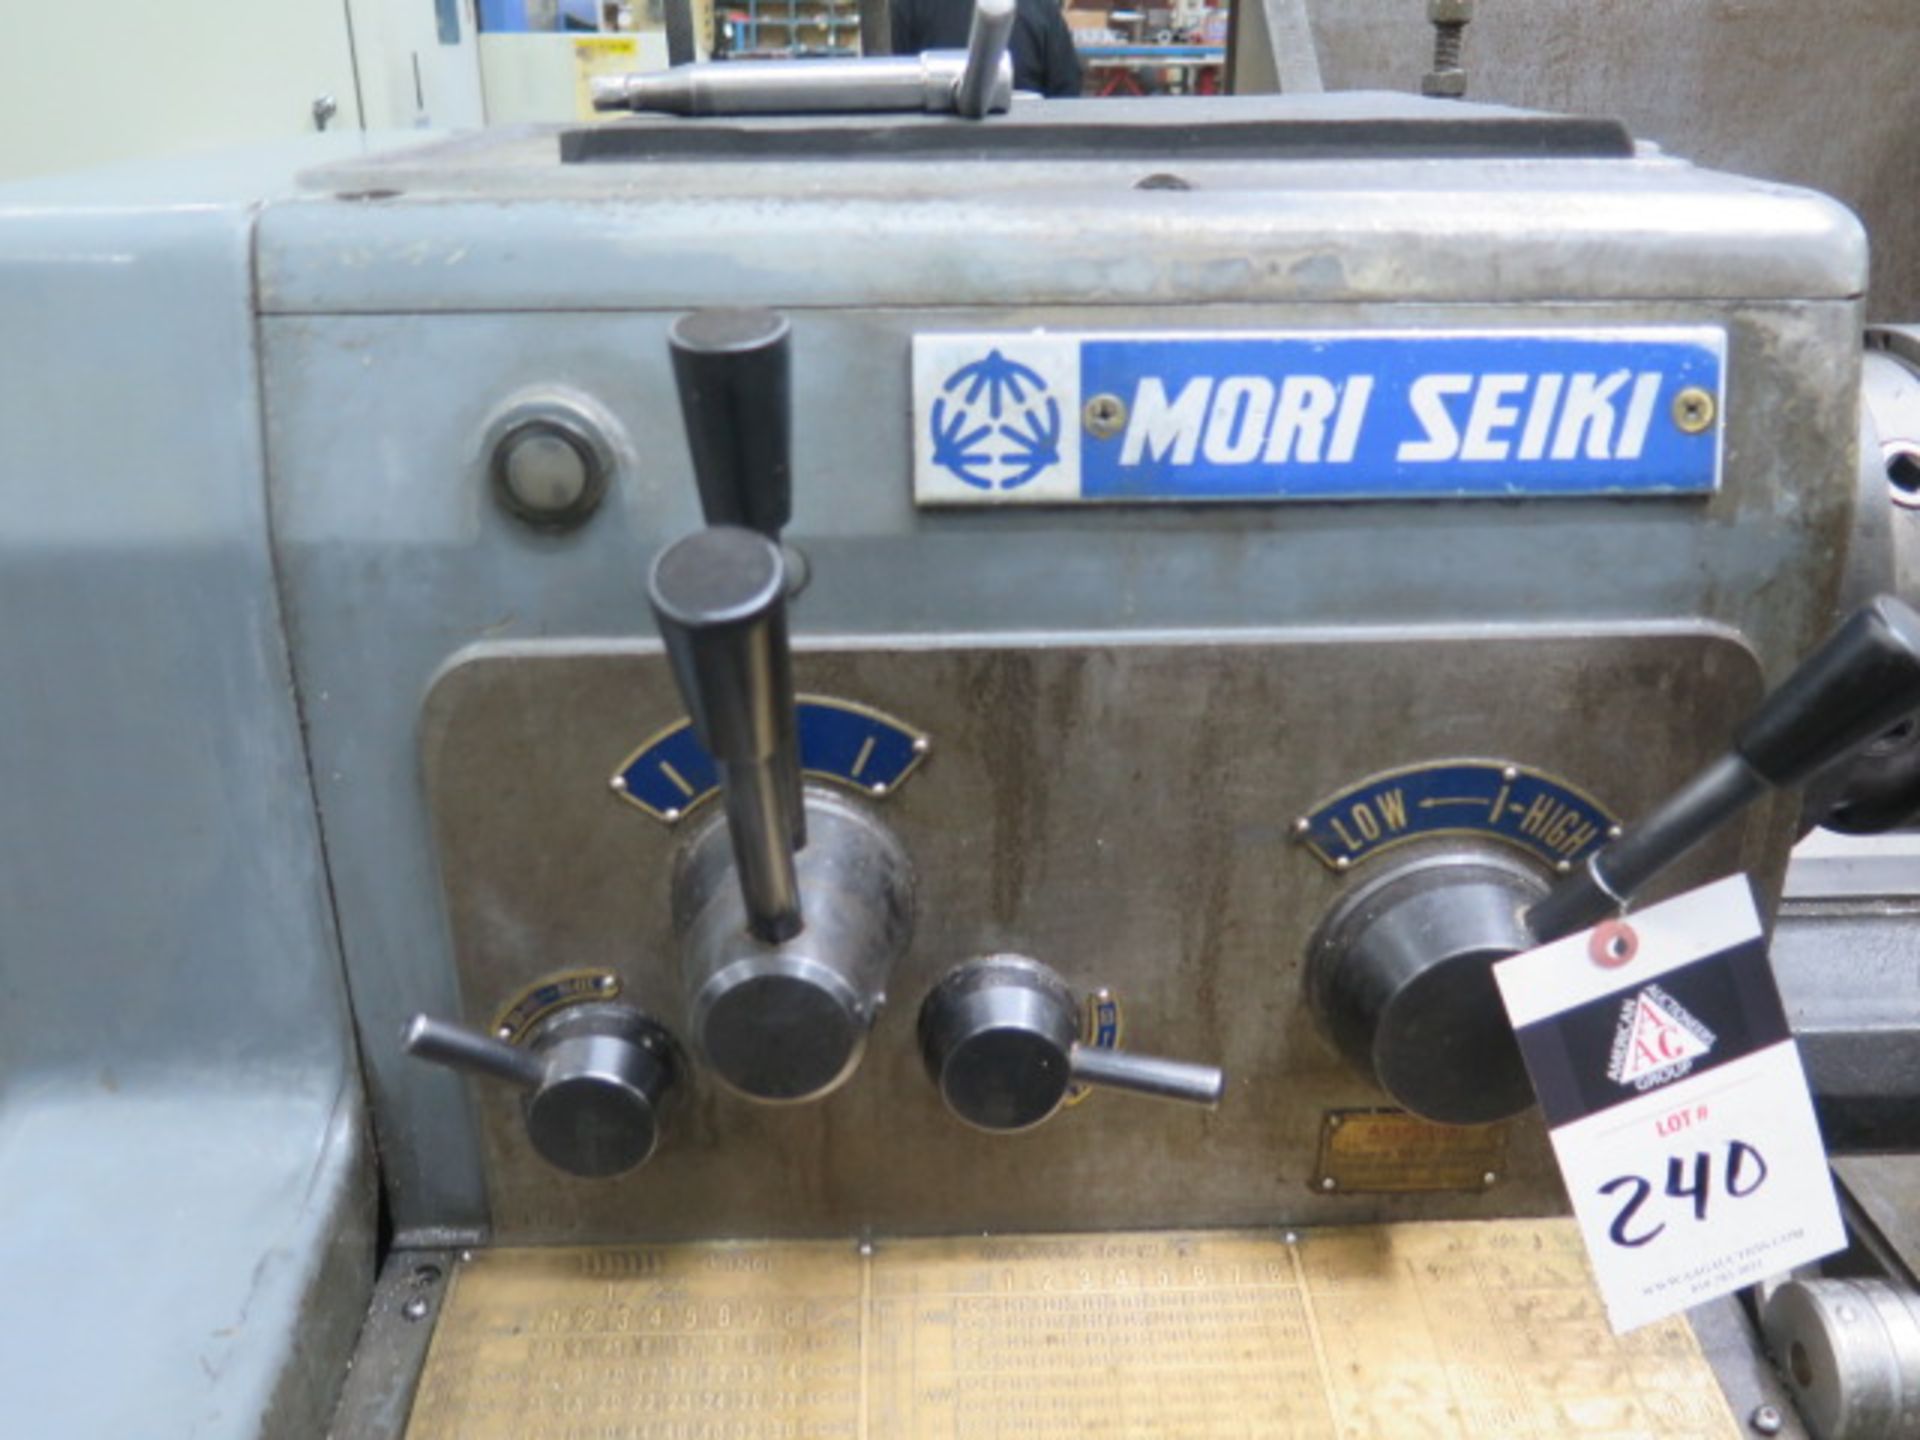 Mori Seiki MS-1250G 17” x 48” Geared Gap Bed Lathe s/n 16533 w/ 32-1800 RPM, Inch Thread, SOLD AS IS - Image 4 of 12